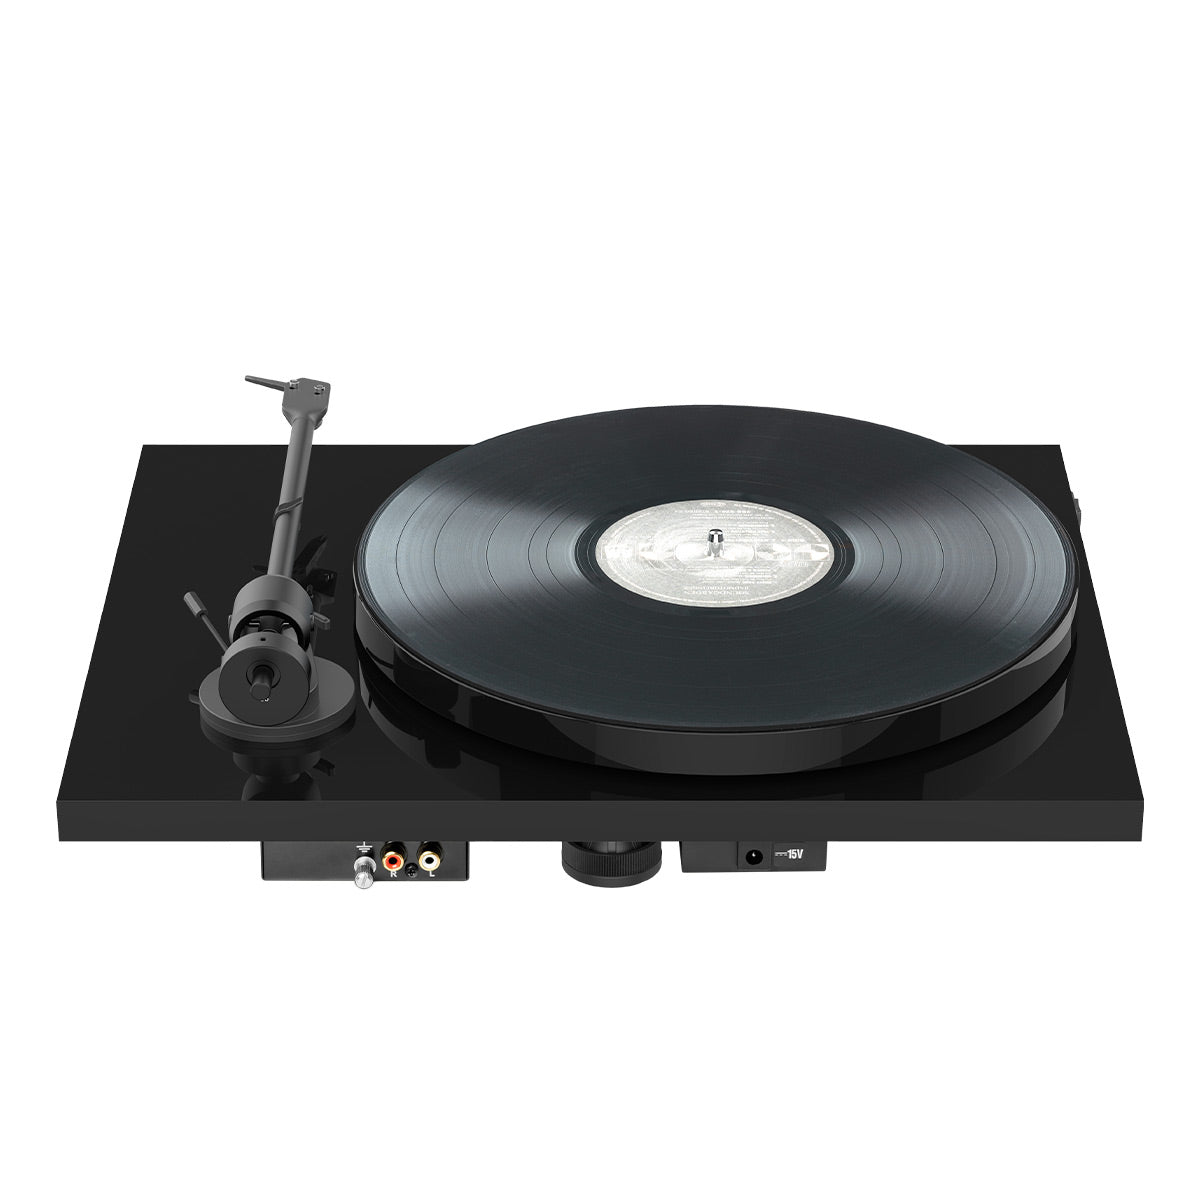 Pro-Ject E1 Phono Plug & Play Turntable with built-in Phono Preamp (Black)